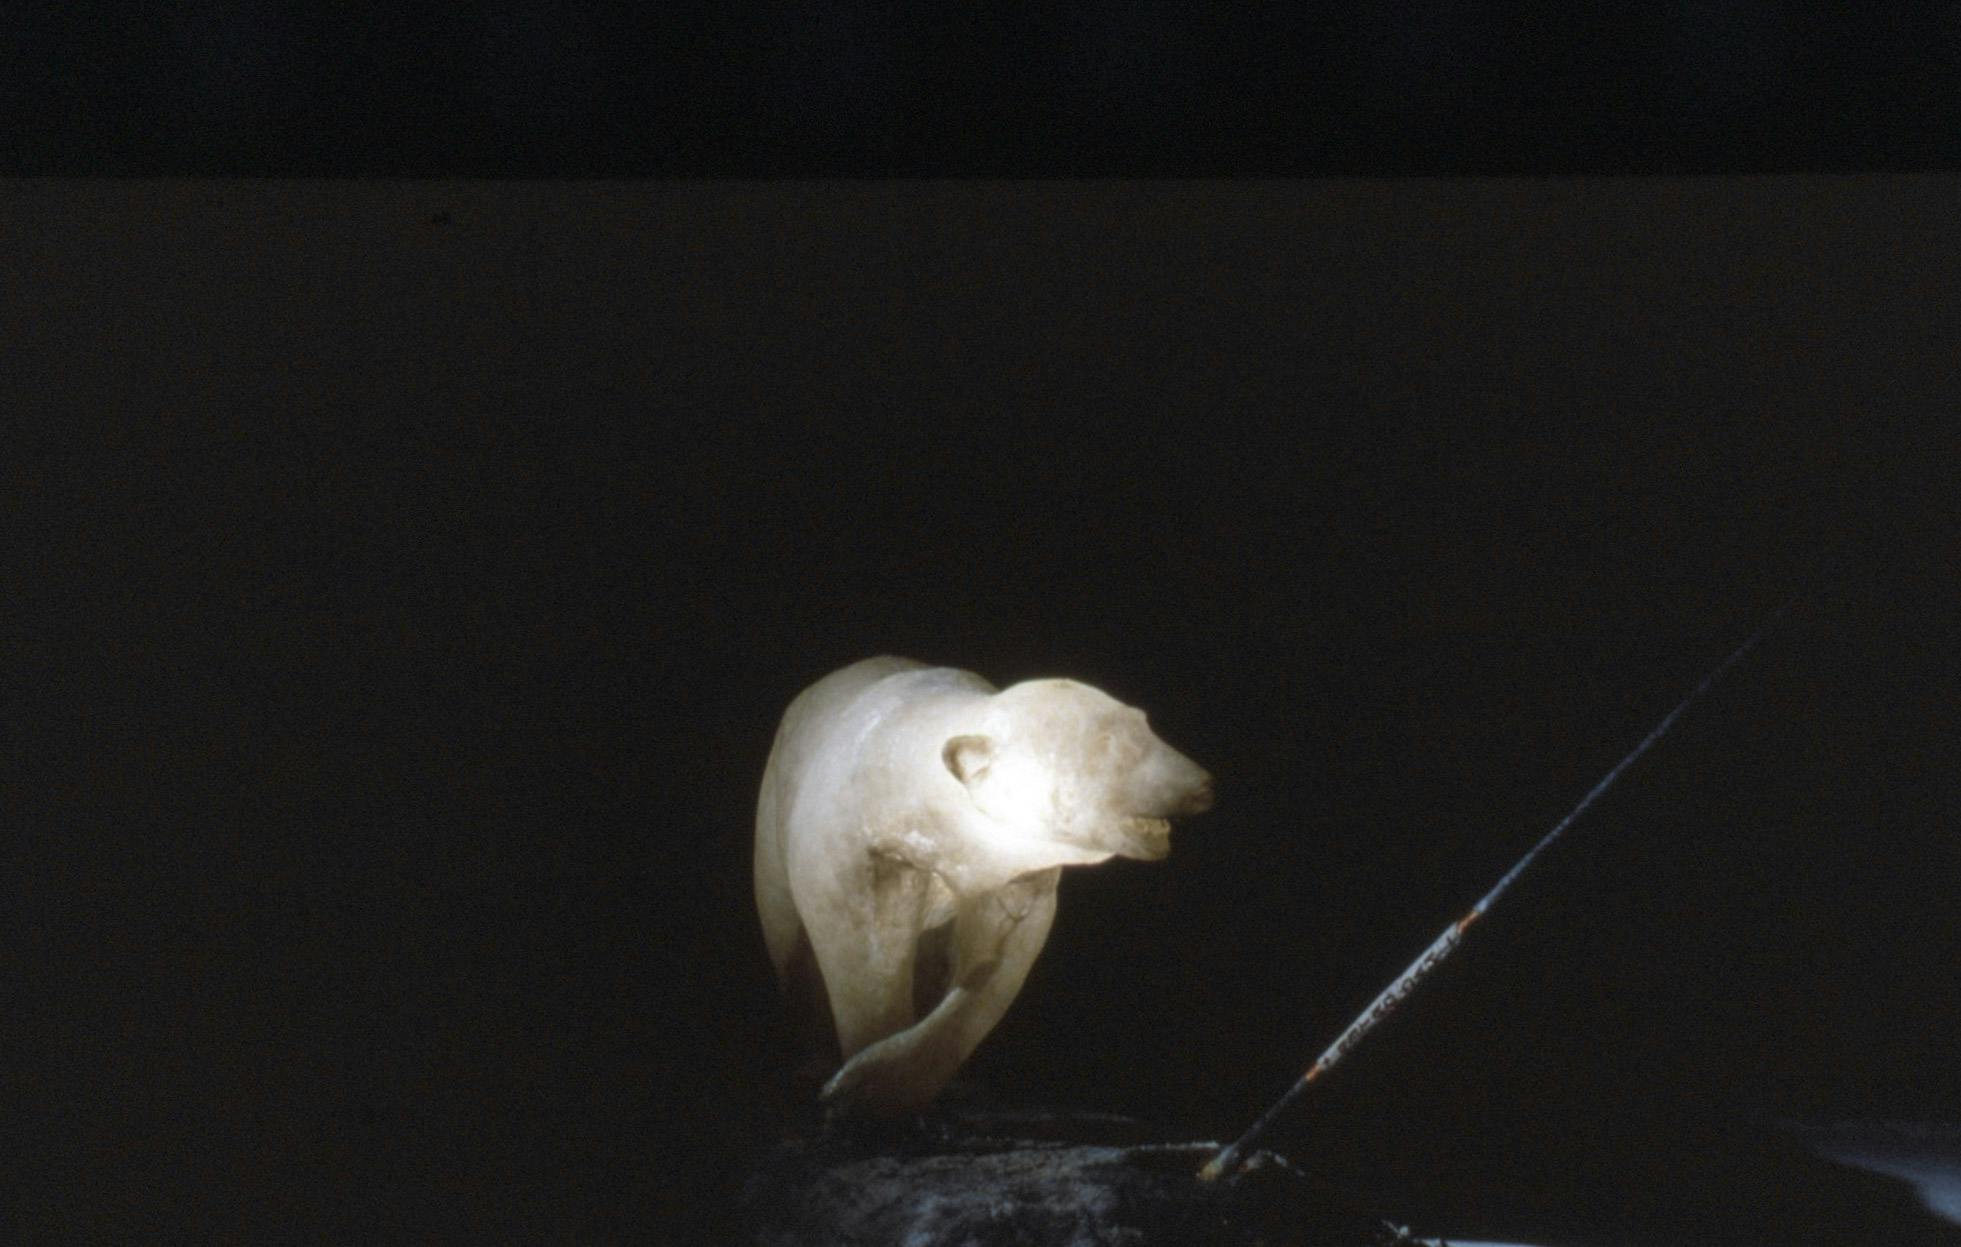 At the centre of a dark room, there is a glowing sculpture of a polar bear. A long spear with text is embedded into the rock formation it sits on. In the background, a white wall is faintly visible. 